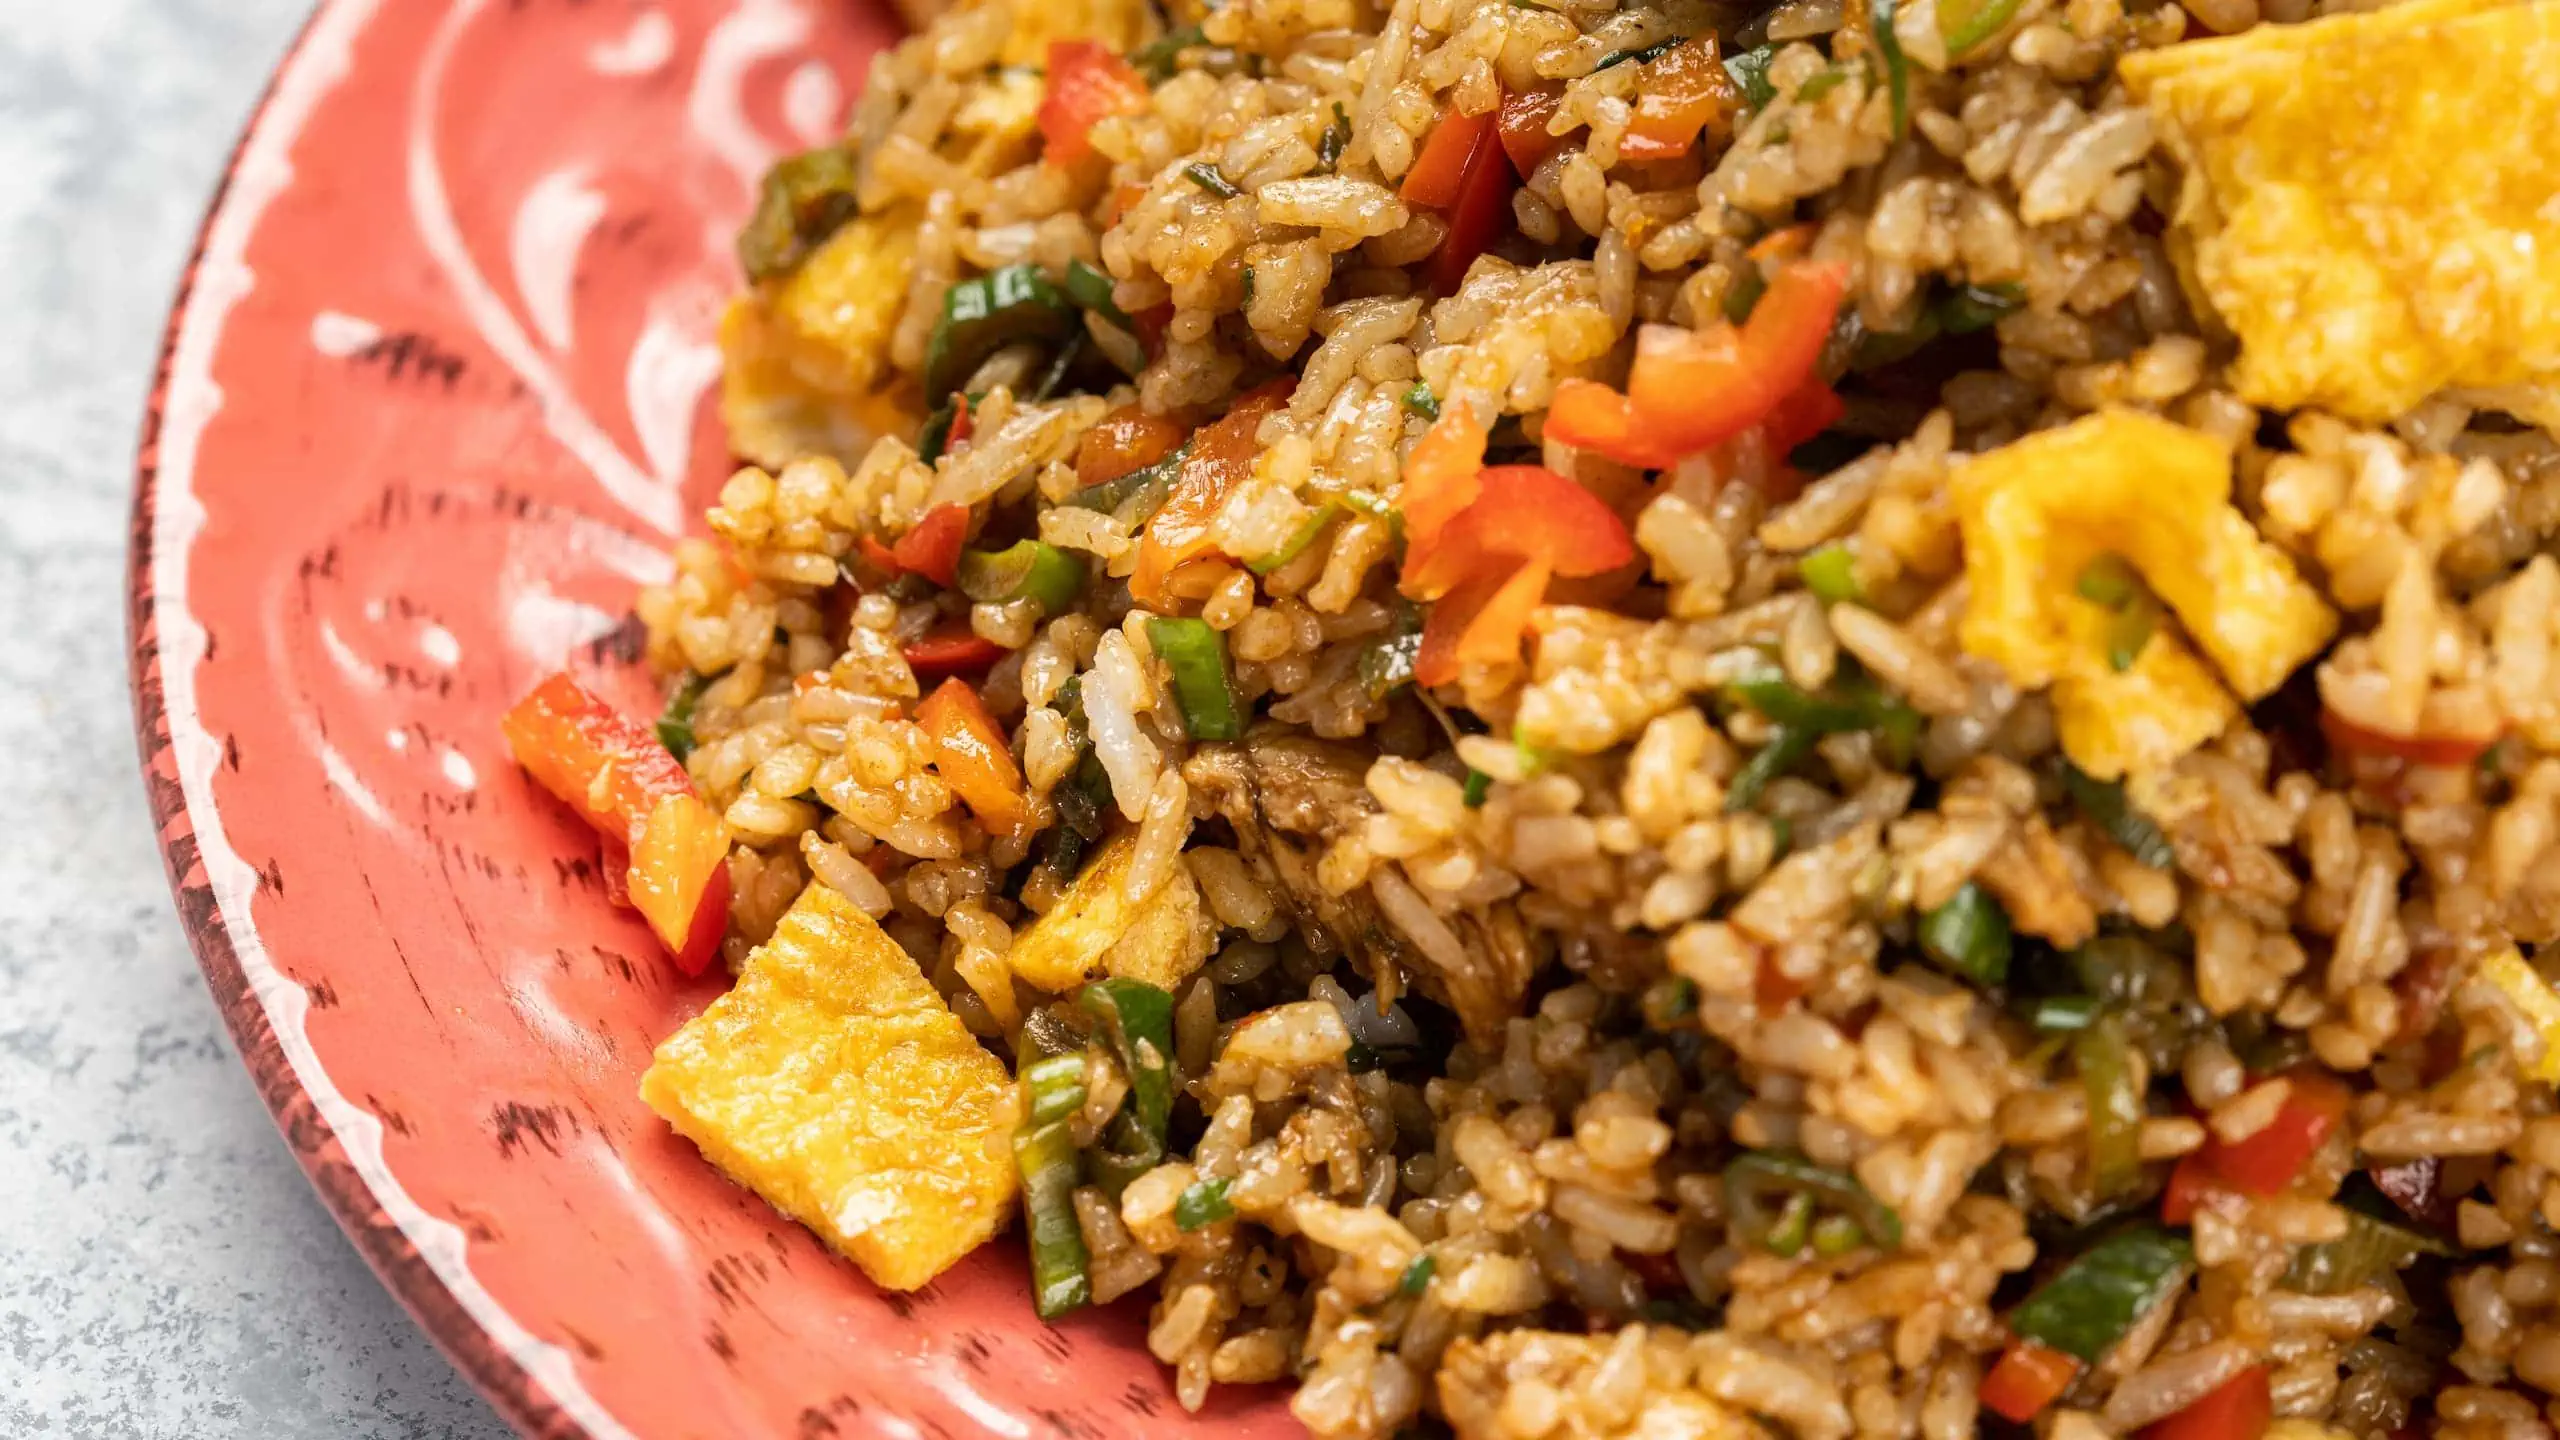 Our version of Bojangles dirty rice recipe